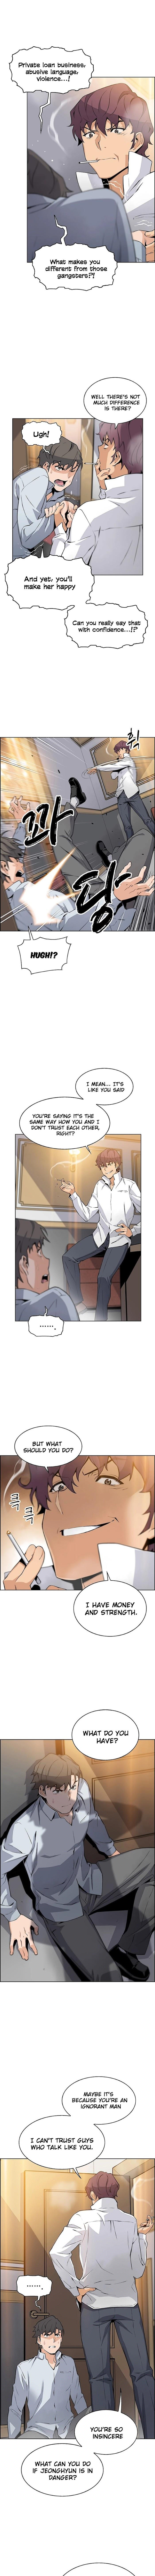 Housekeeper [Neck Pillow, Paper] Ch.49/49 [English] [Manhwa PDF] Completed 403